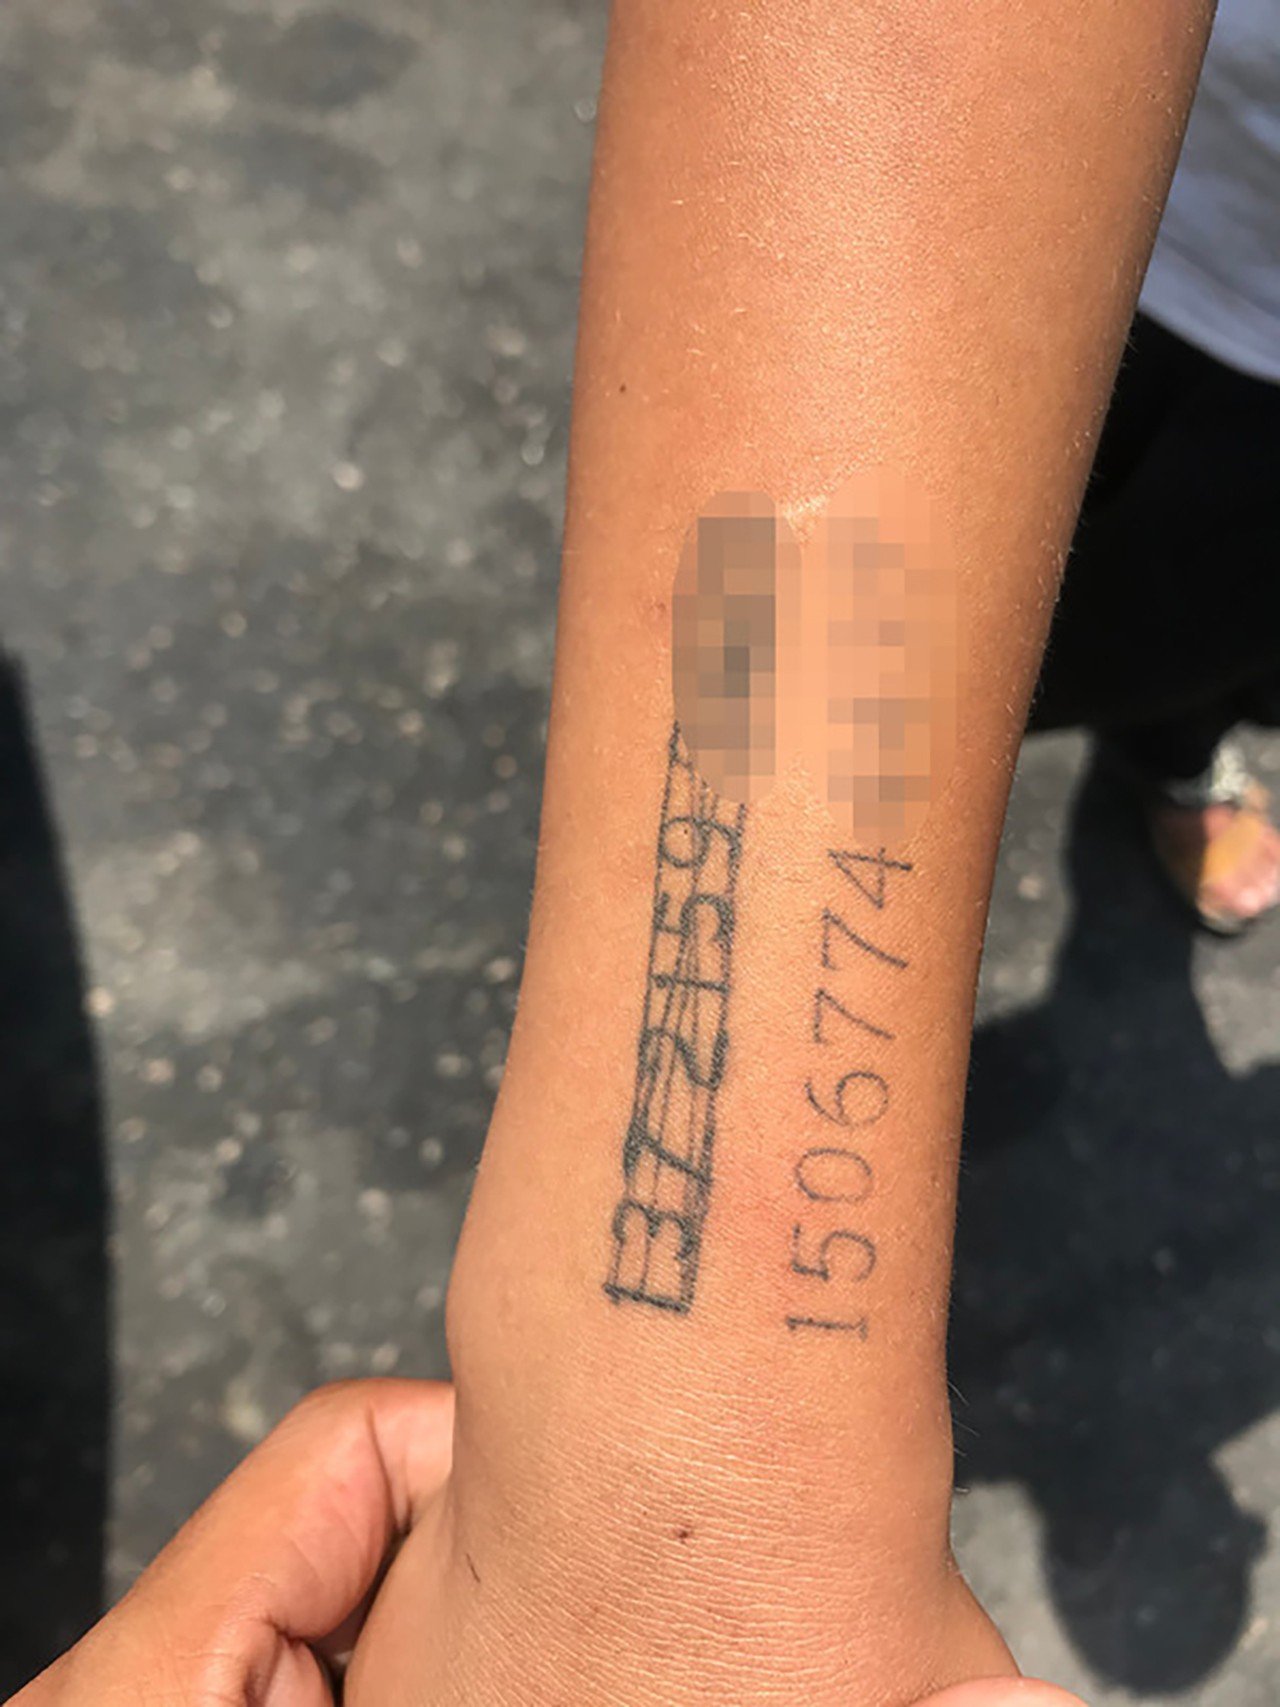 A Chinese woman had her phone numbers tattooed on her son’s arm so people could call her if he got lost. Photo: Qq.com